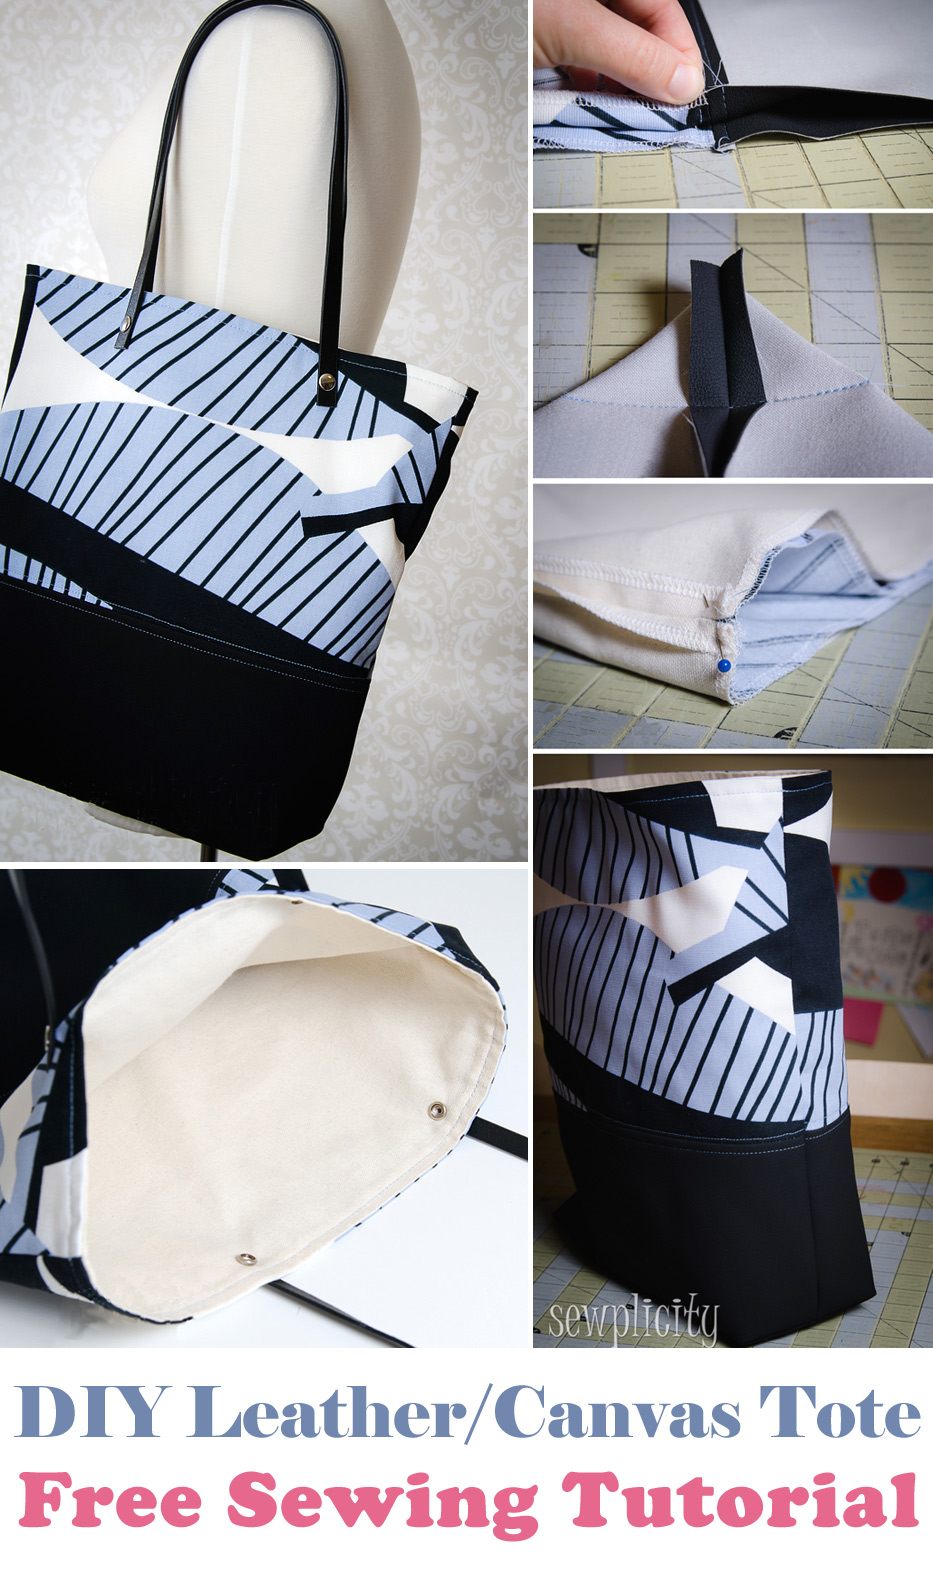 Leather / Canvas Tote Bag Tutorial